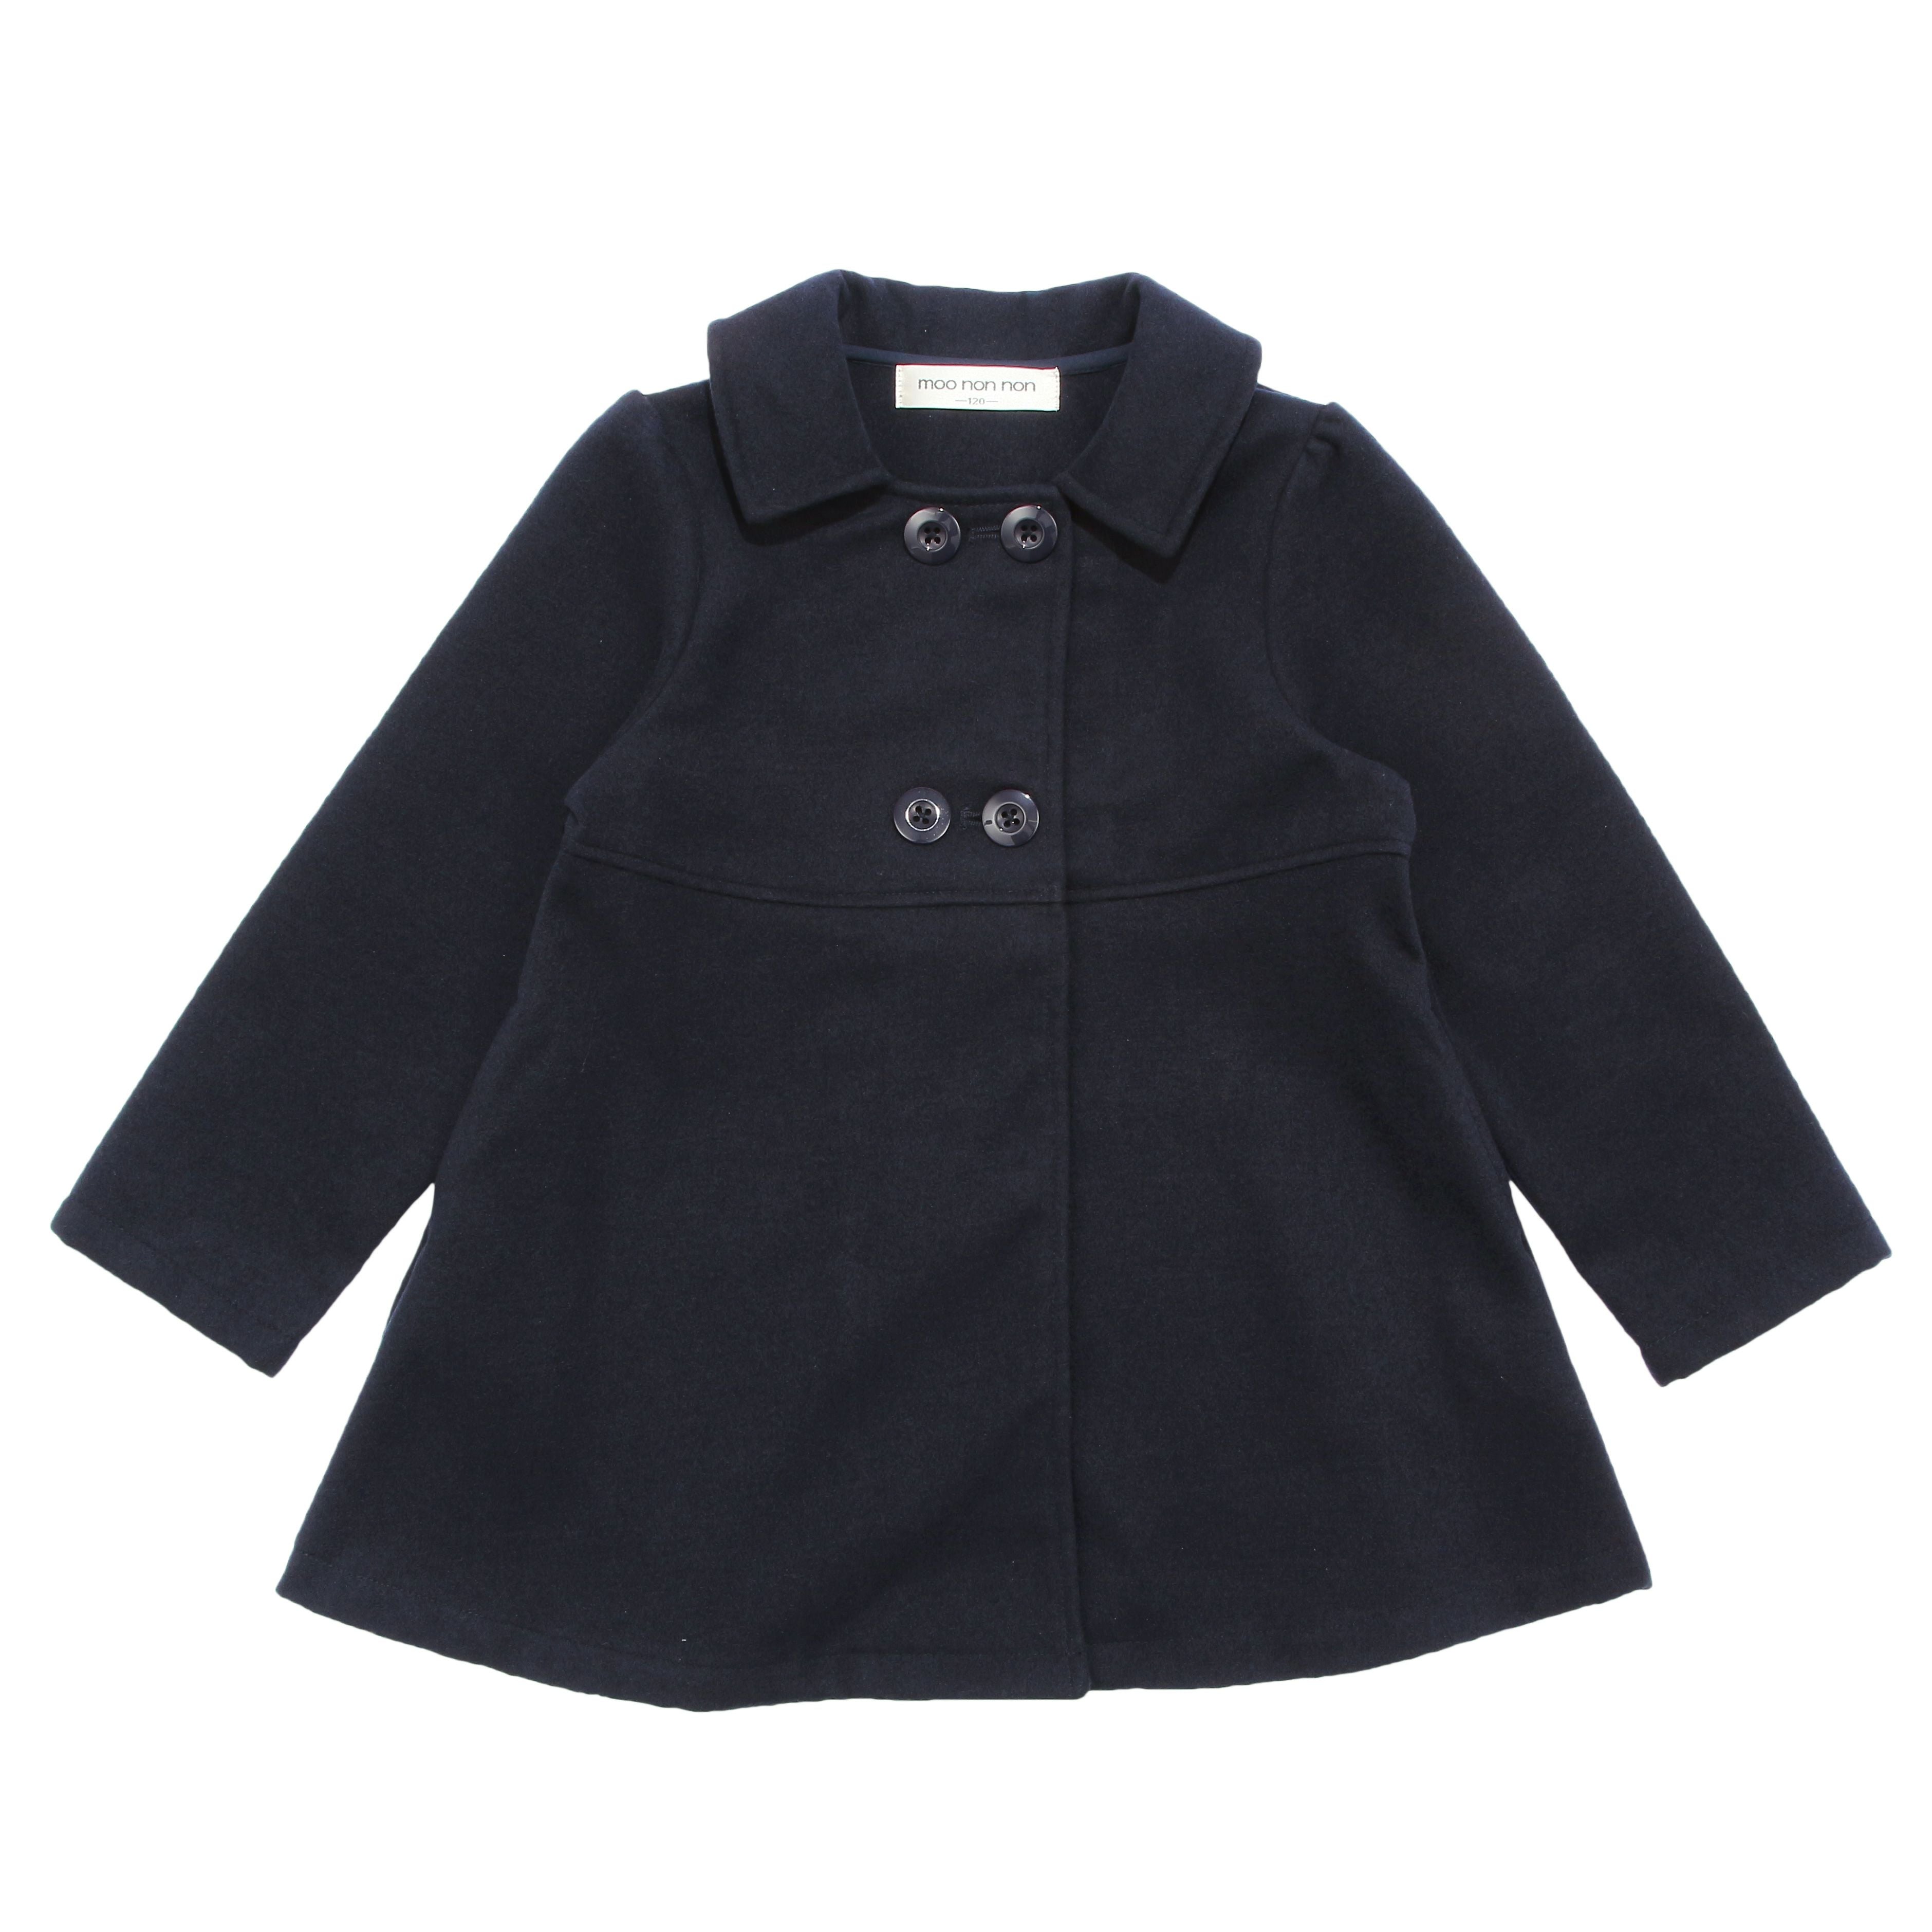 Double button coat with pockets Navy front